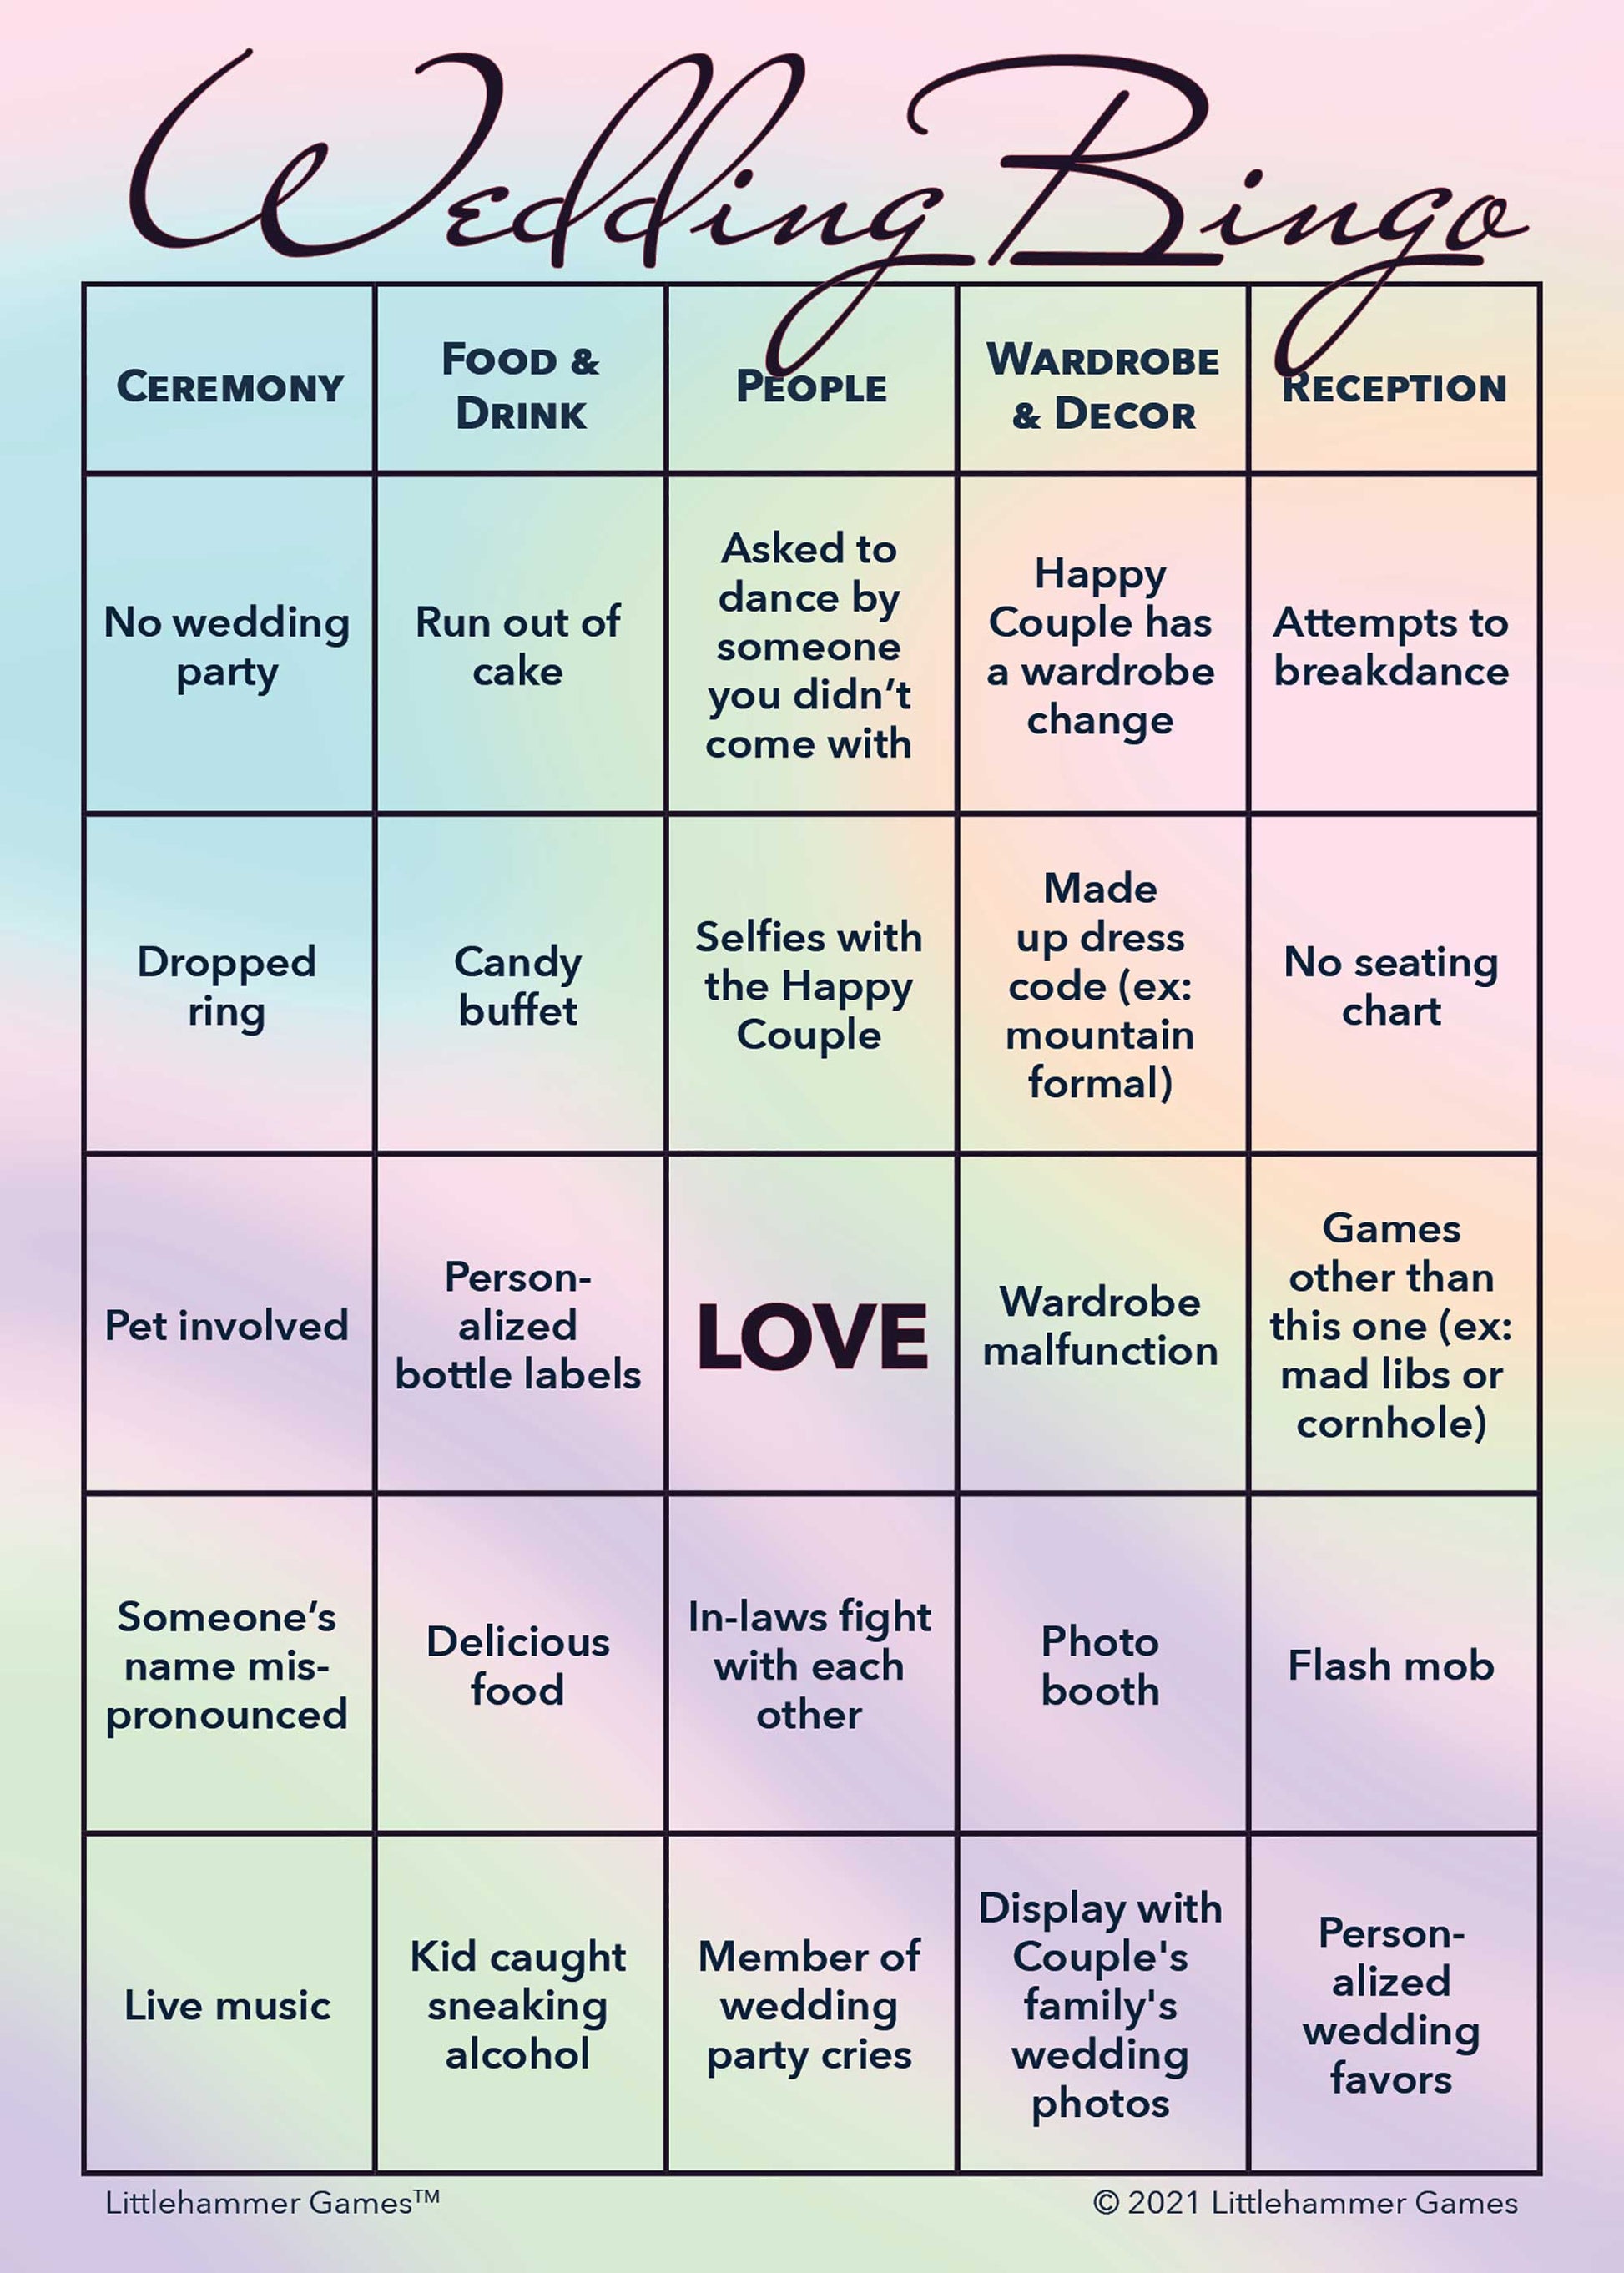 Wedding Bingo game card with a holographic background